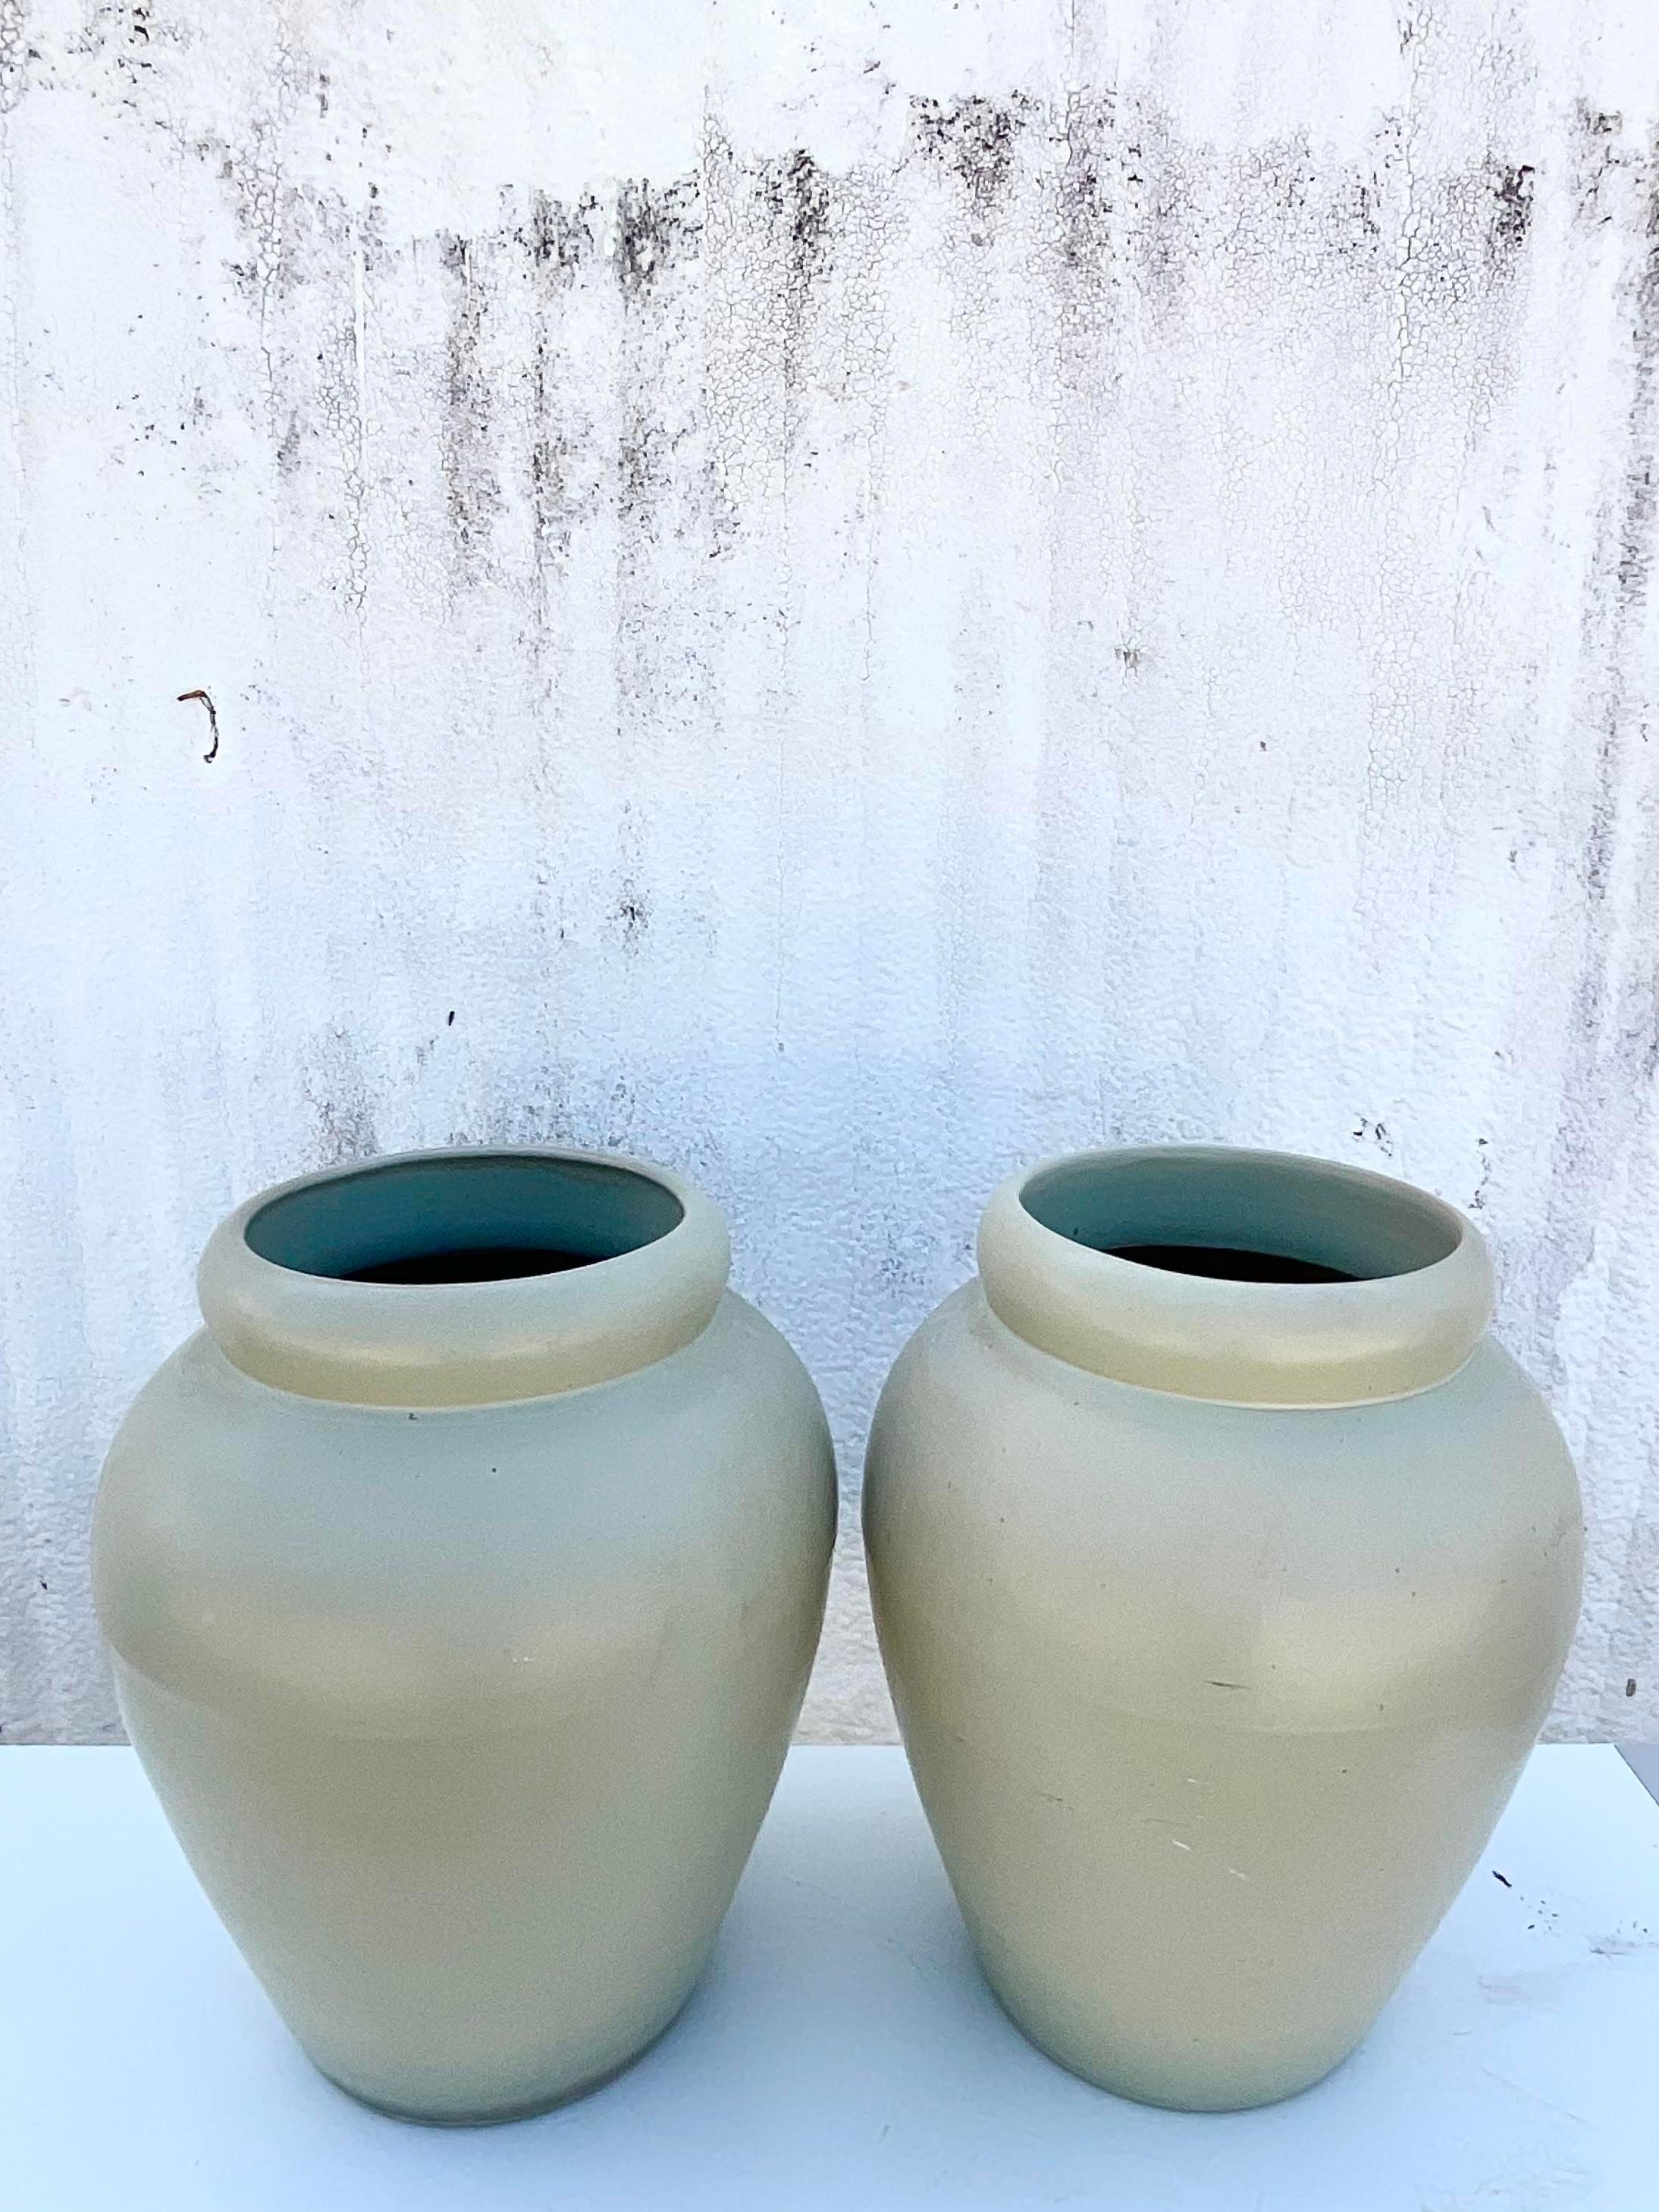 Vintage Contemporary pair of urns. Beautiful matte glazed finish in a pale green color. Drilled for draining. Part of a collection of urns that are also available on my Chairish page. Acquired from a Palm Beach estate. 